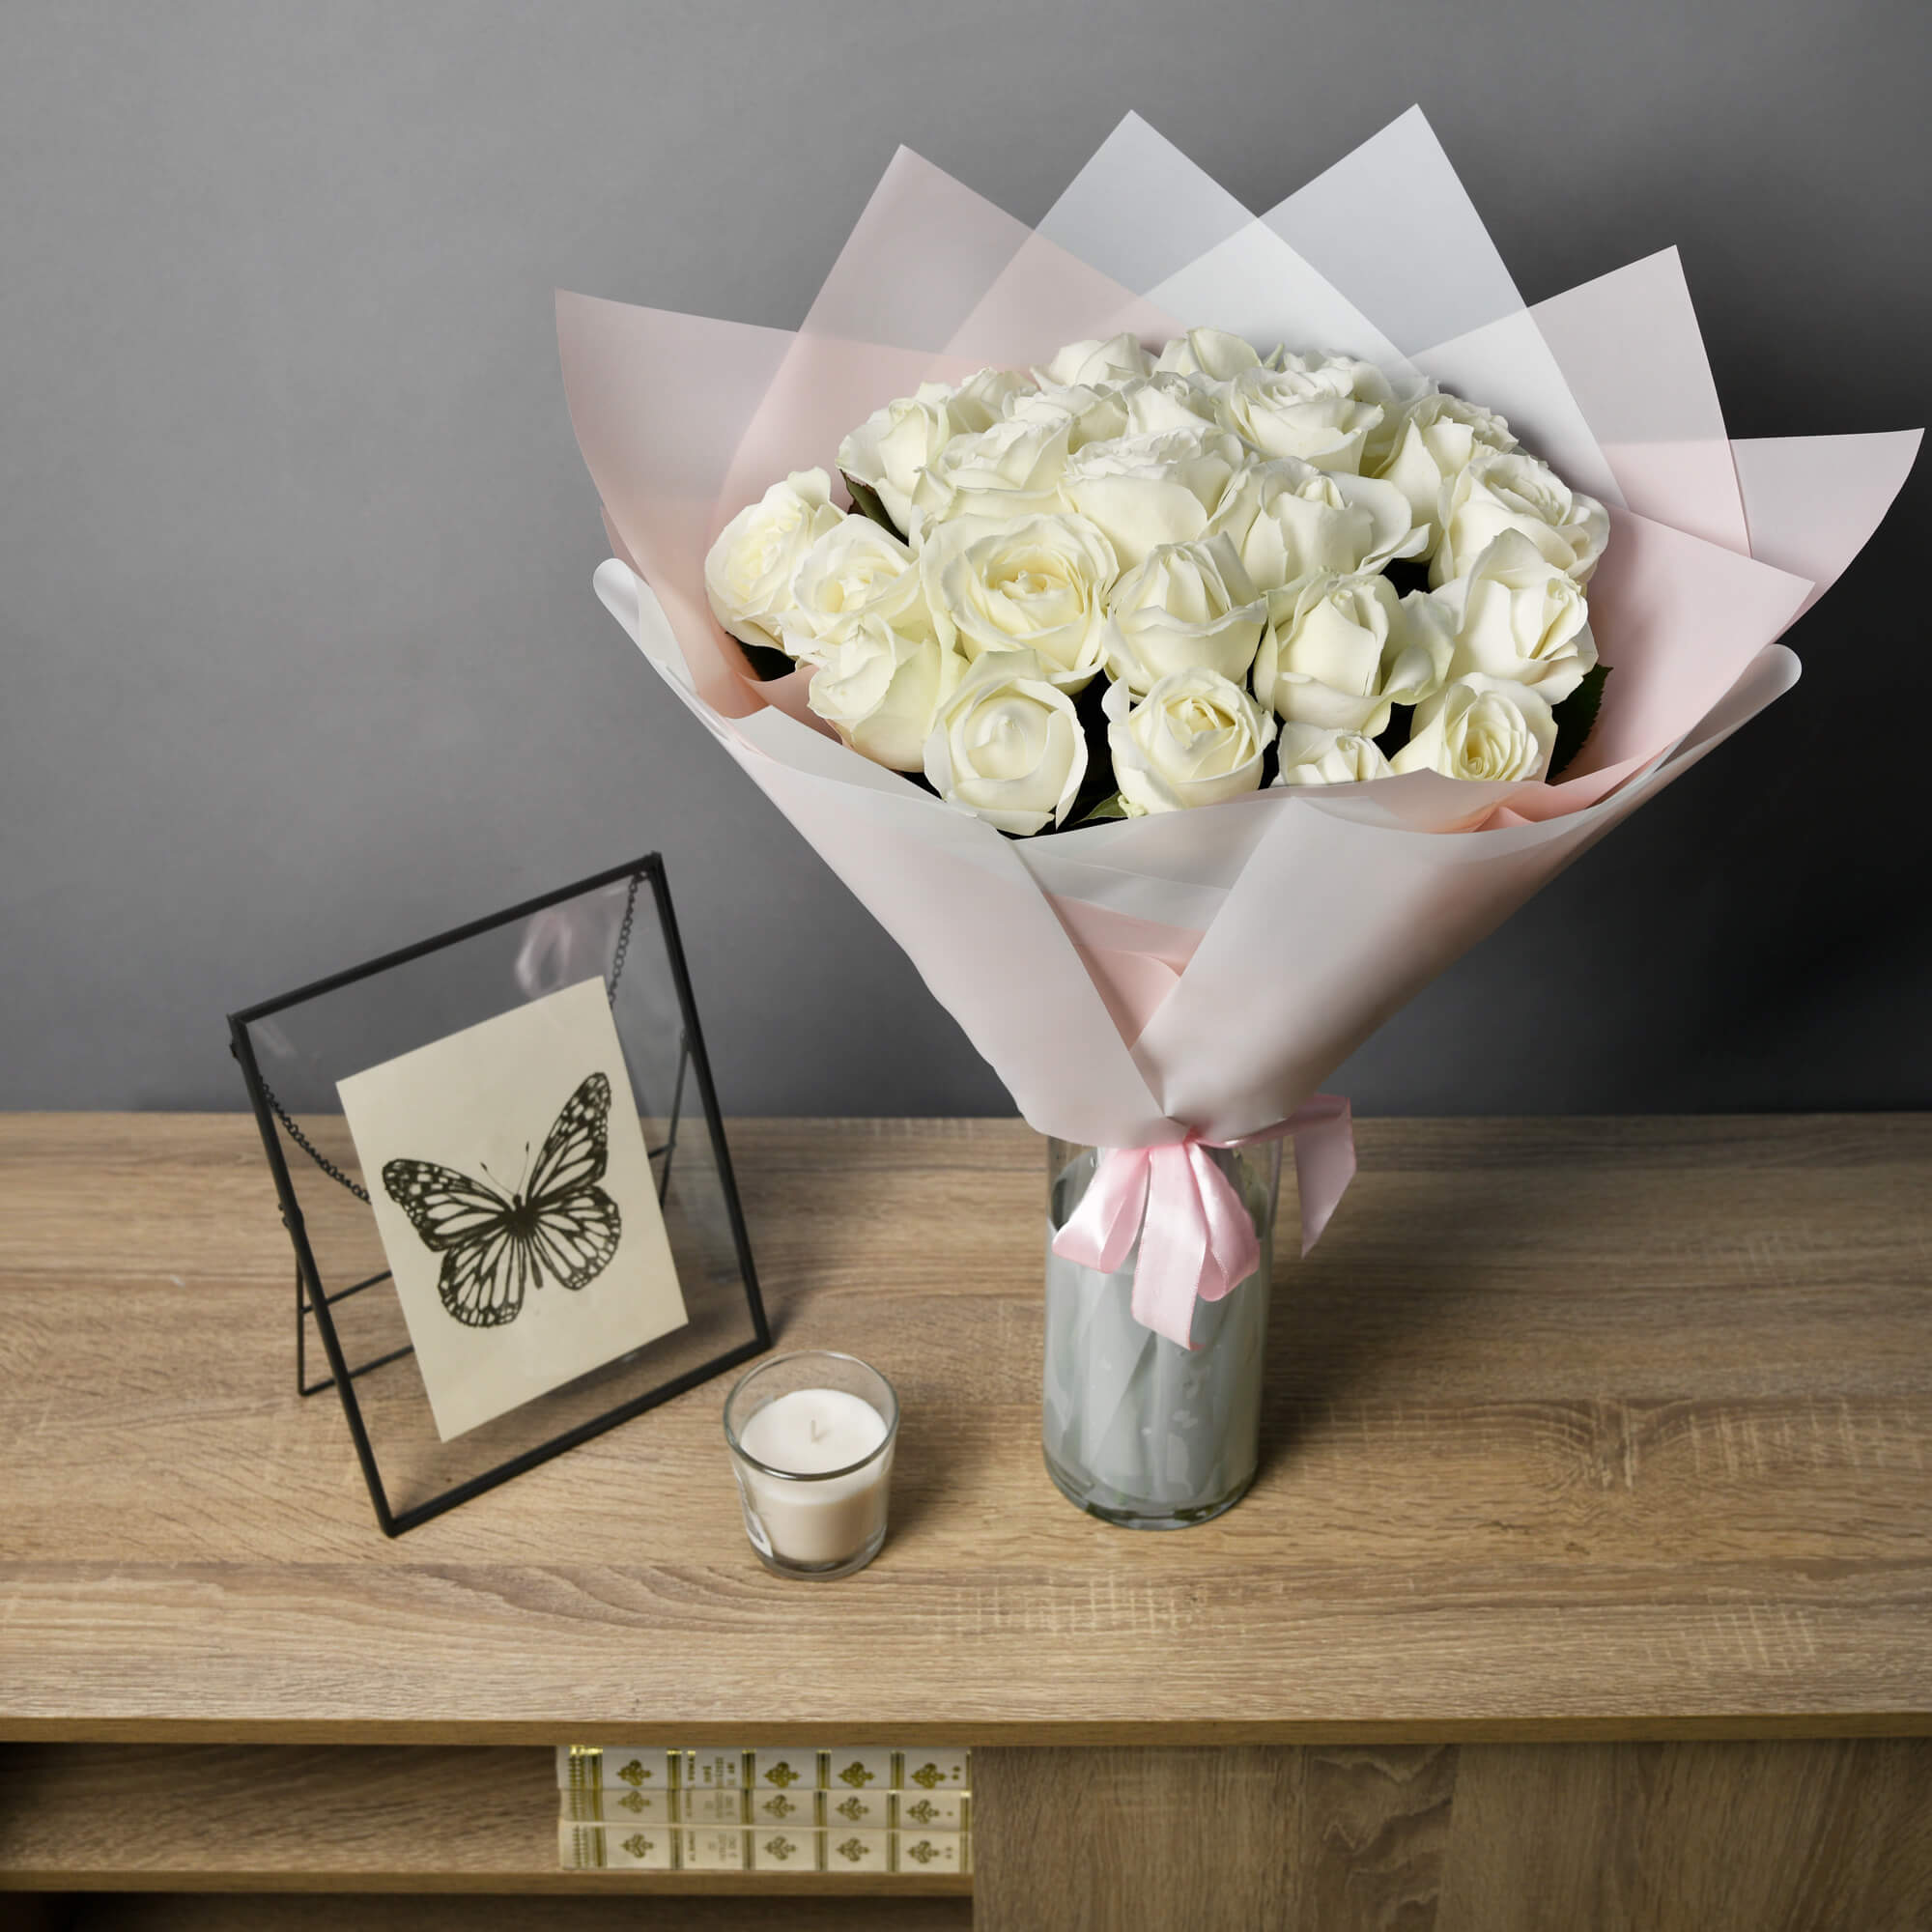 Bouquet of 23 white roses